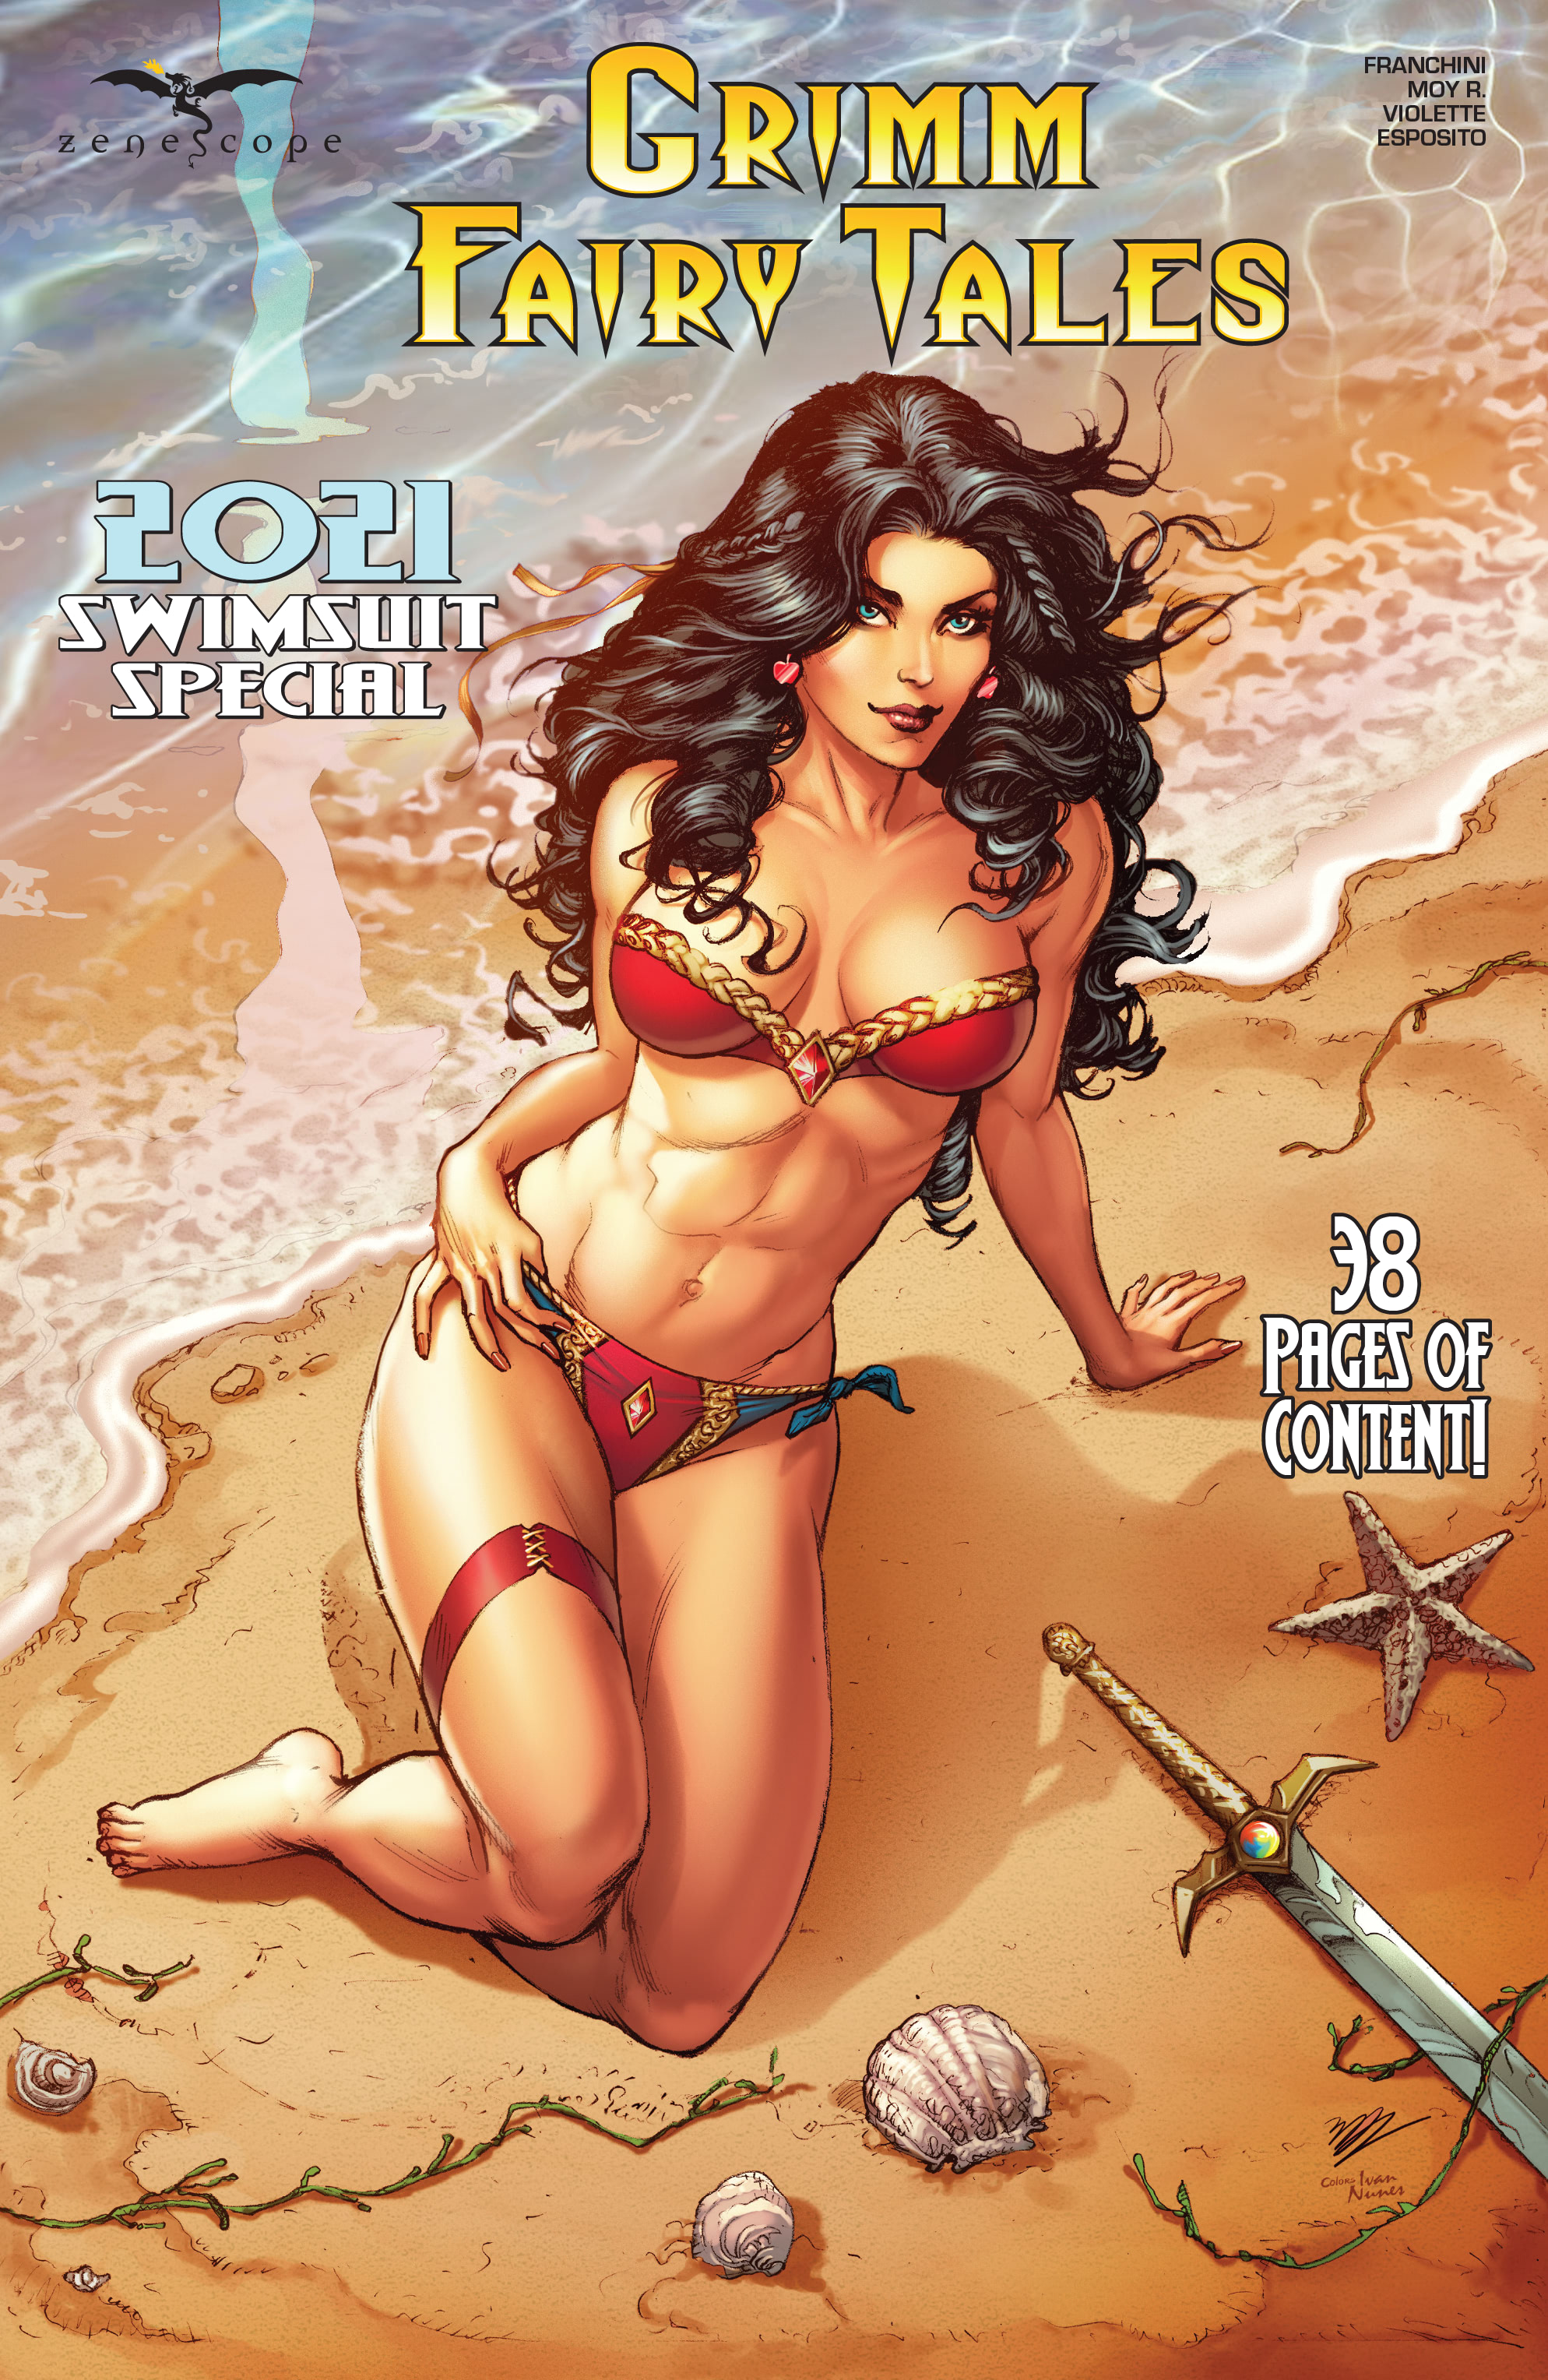 Grimm Fairy Tales: 2021 Swimsuit (2021): Chapter 1 - Page 1